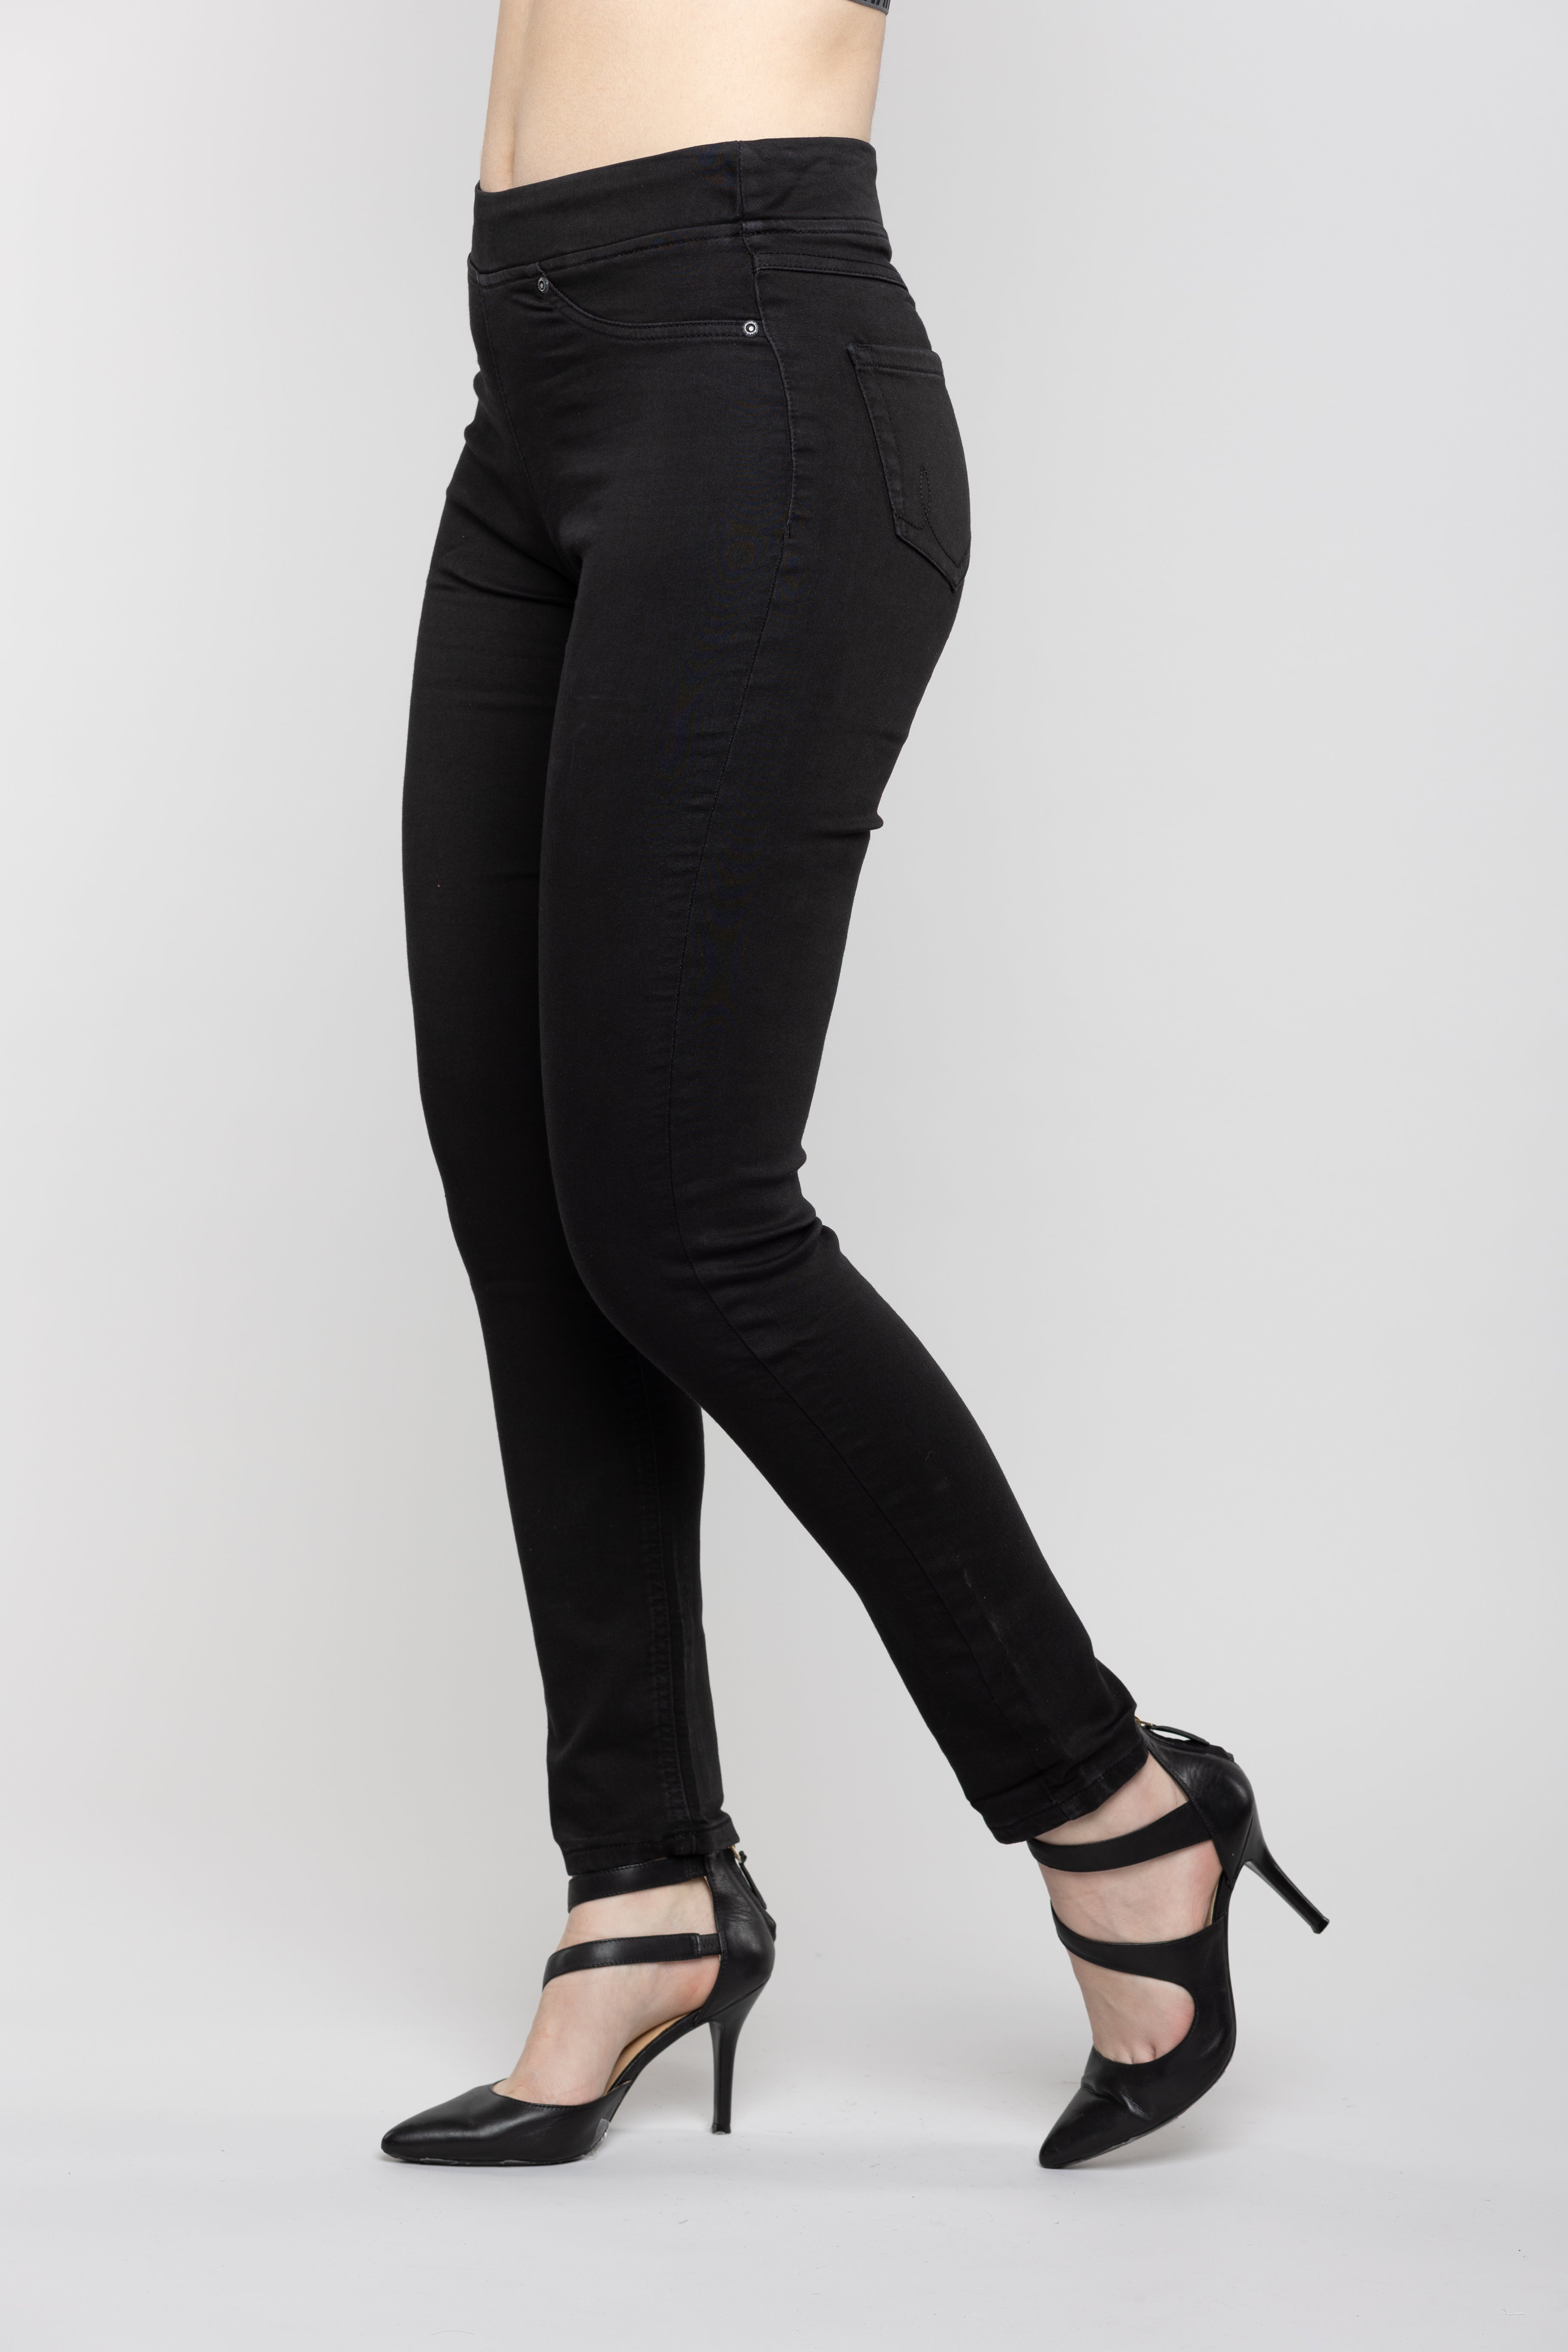 Angela Slim Leg Pull-On in Black French Terry Knit – Carreli Jeans